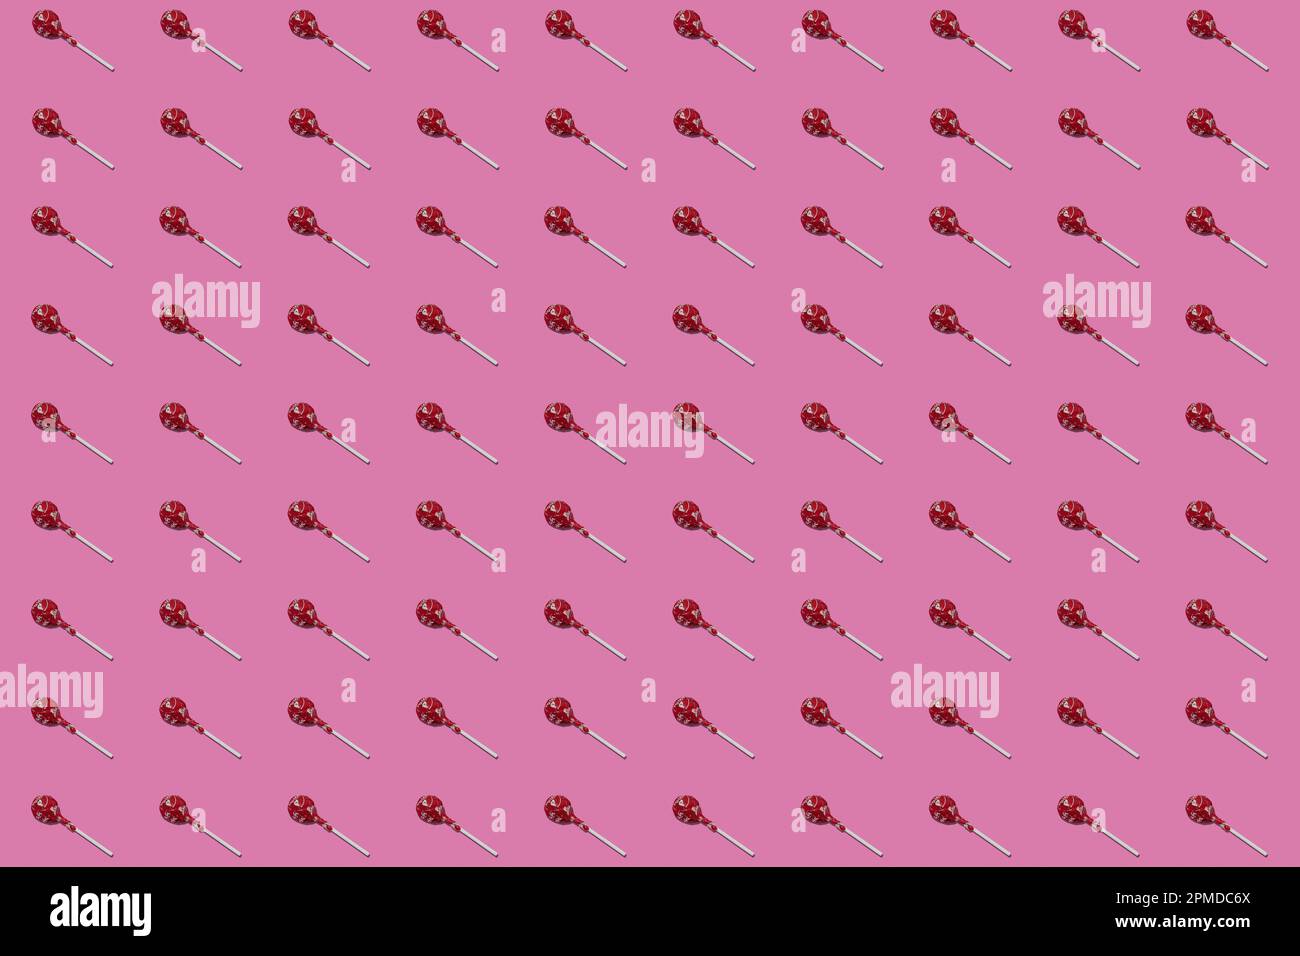 Lollipop Suckers with Red Wrappers in a Repeating Pattern on a Pink Seamless Background Stock Photo